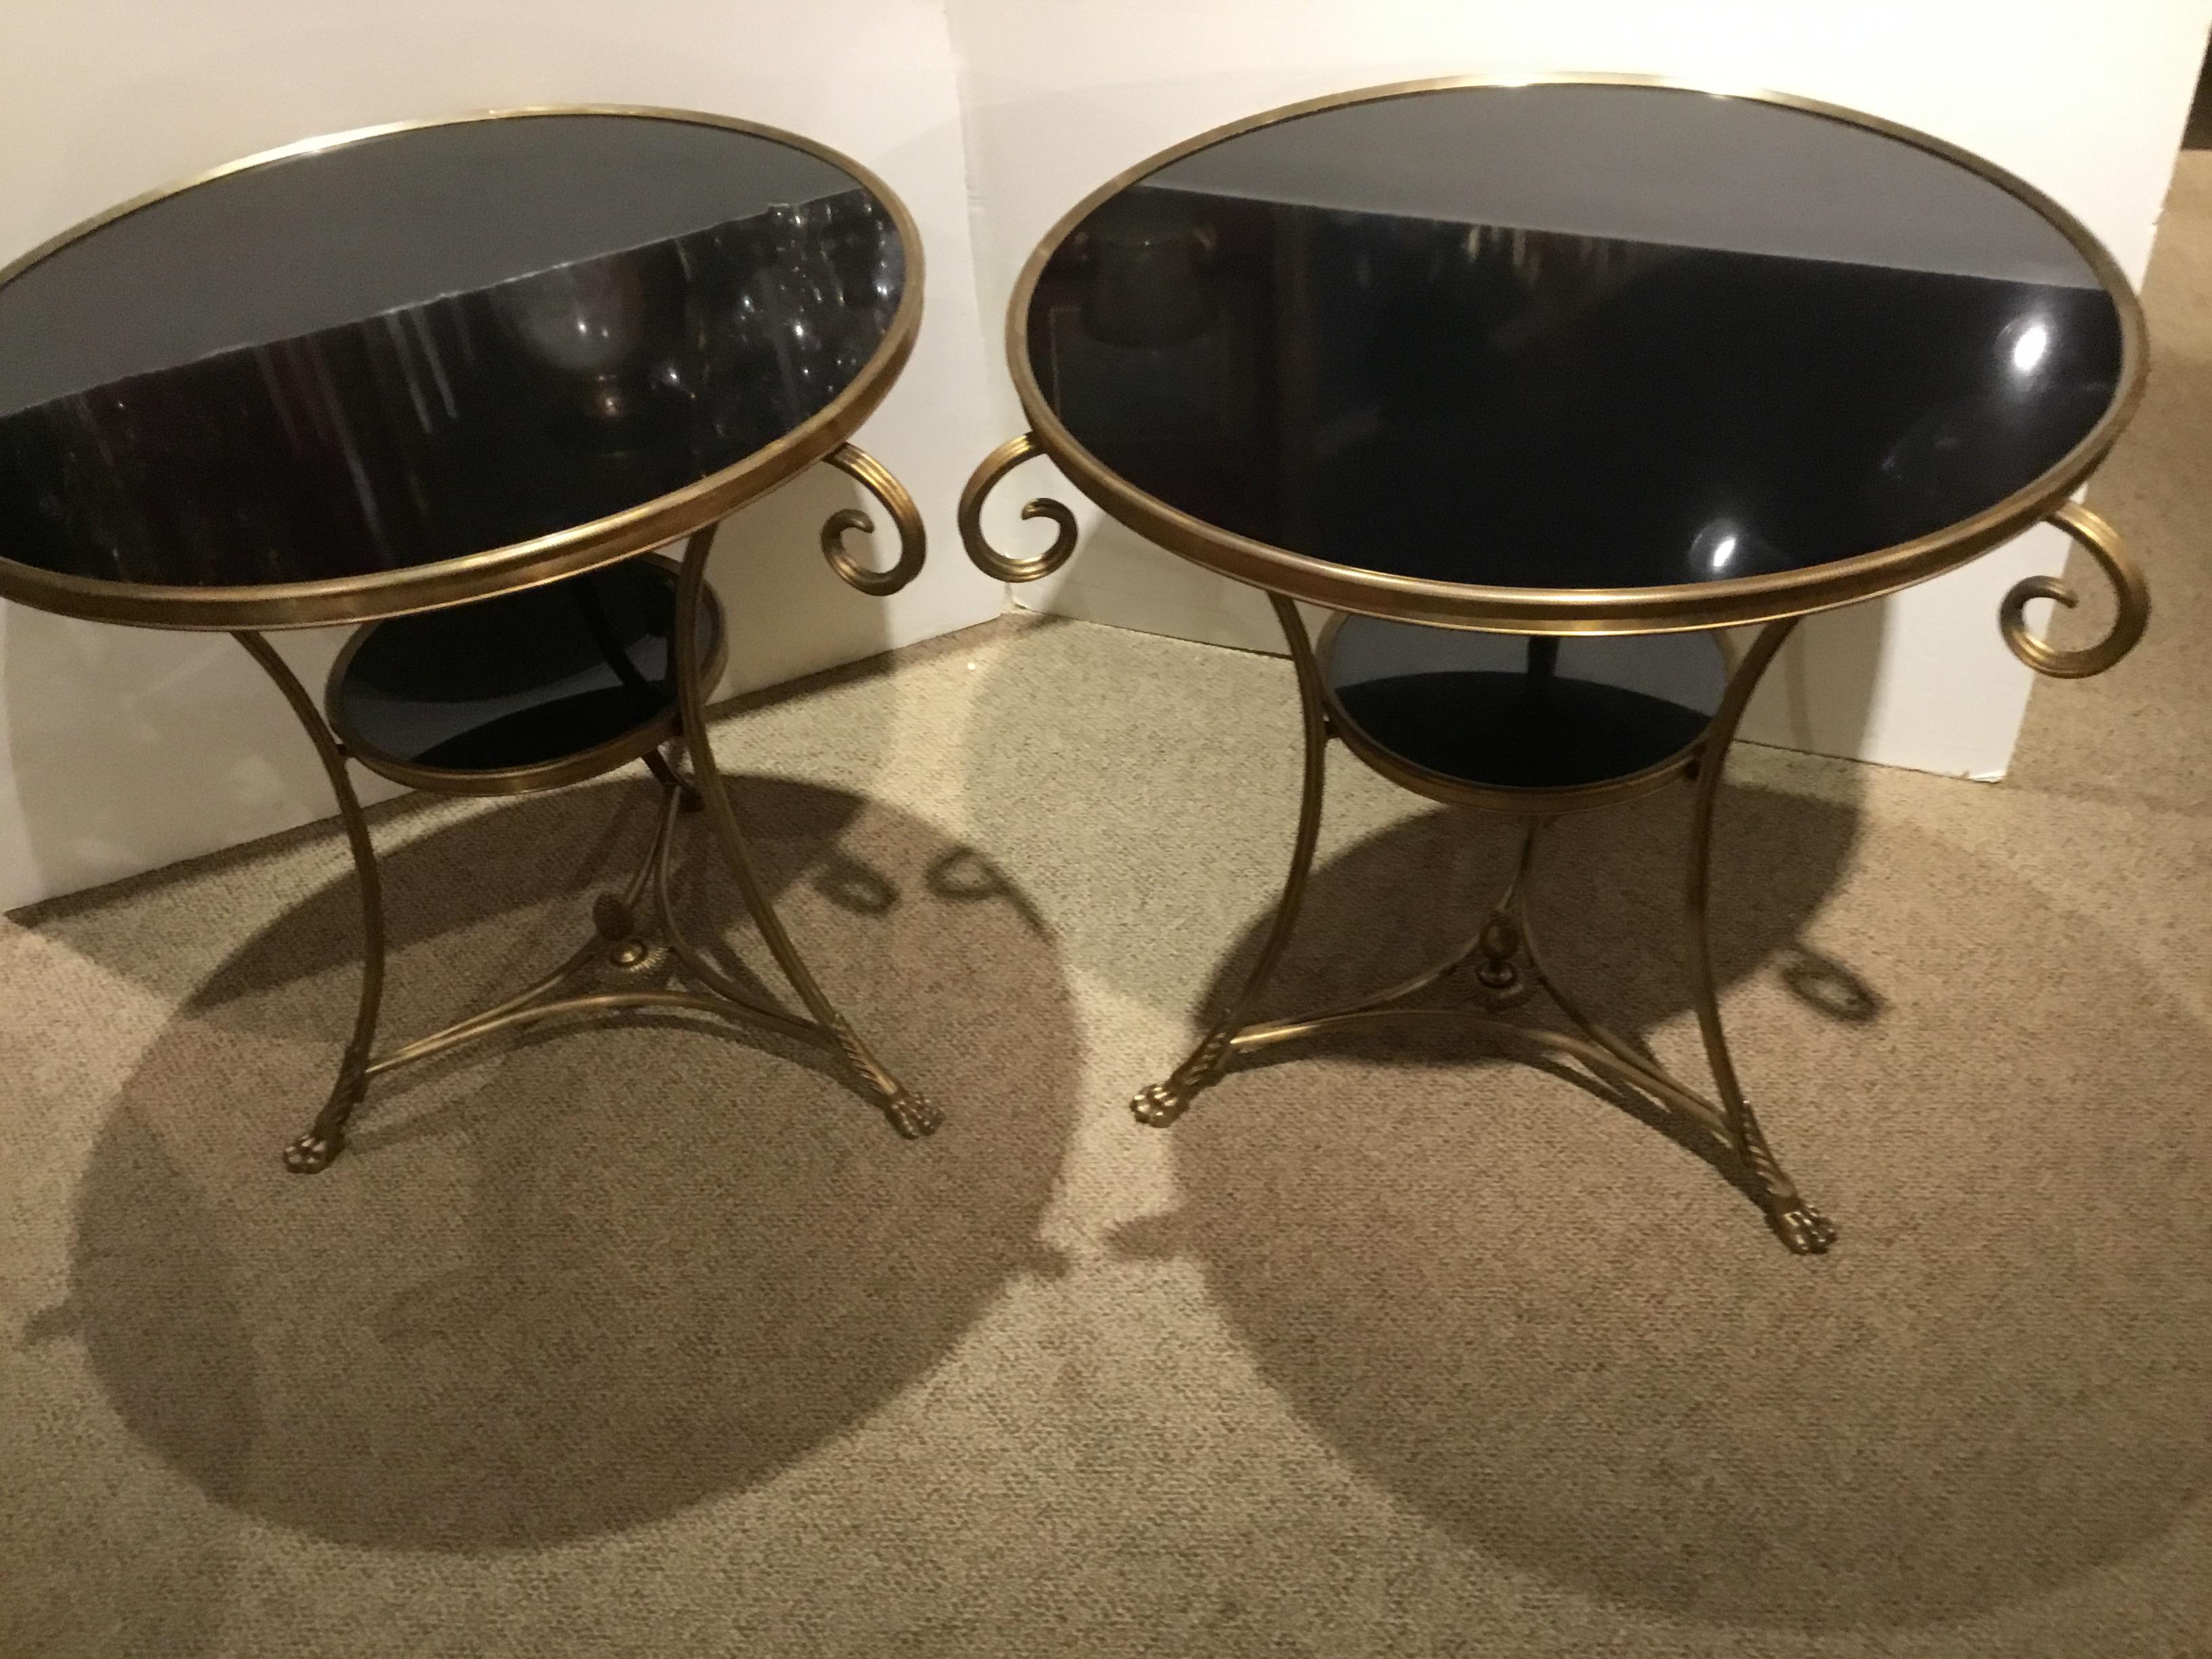 Handsome pair, circular in shape having black marble tops and curved
Legs with a smaller circular marble surface connecting the legs.
Acorn finial is centered at the base and the legs ending in a claw foot.